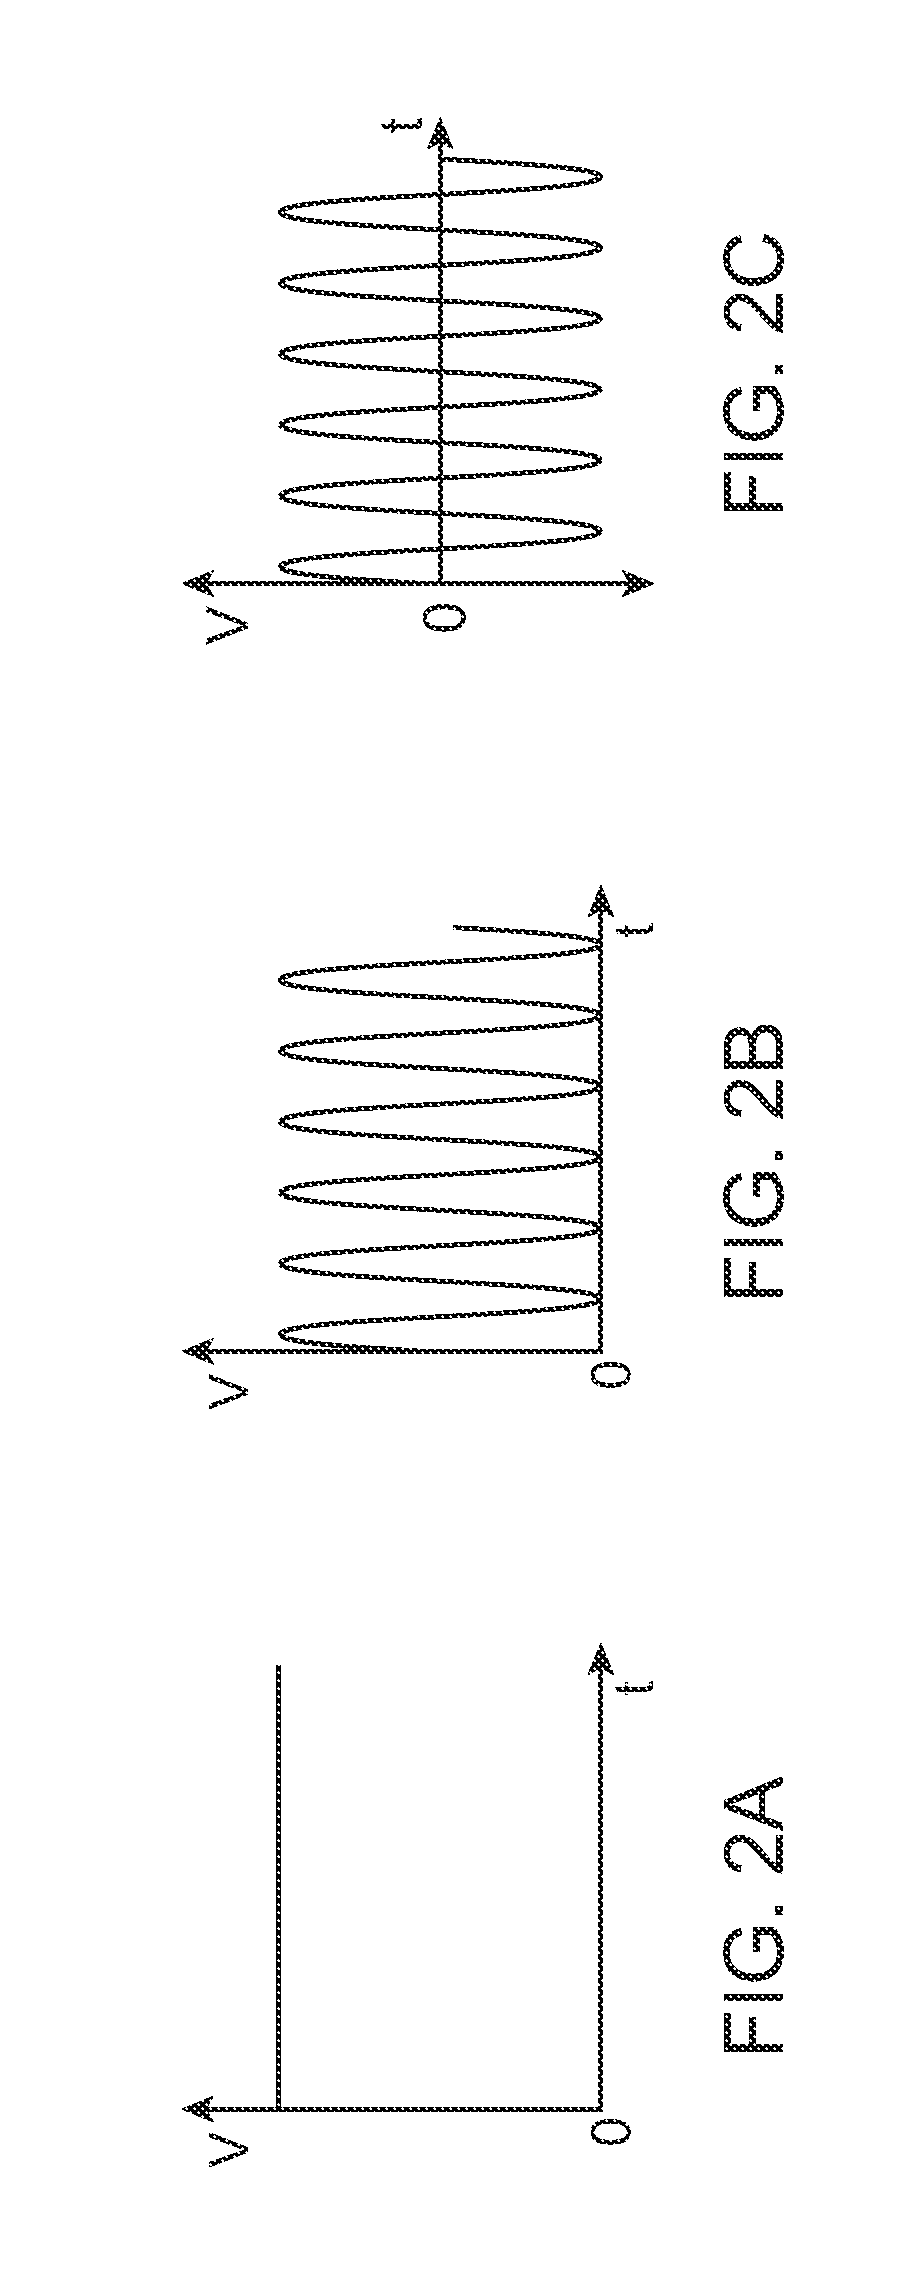 System and Method for Induction Heating of a Soldering Iron